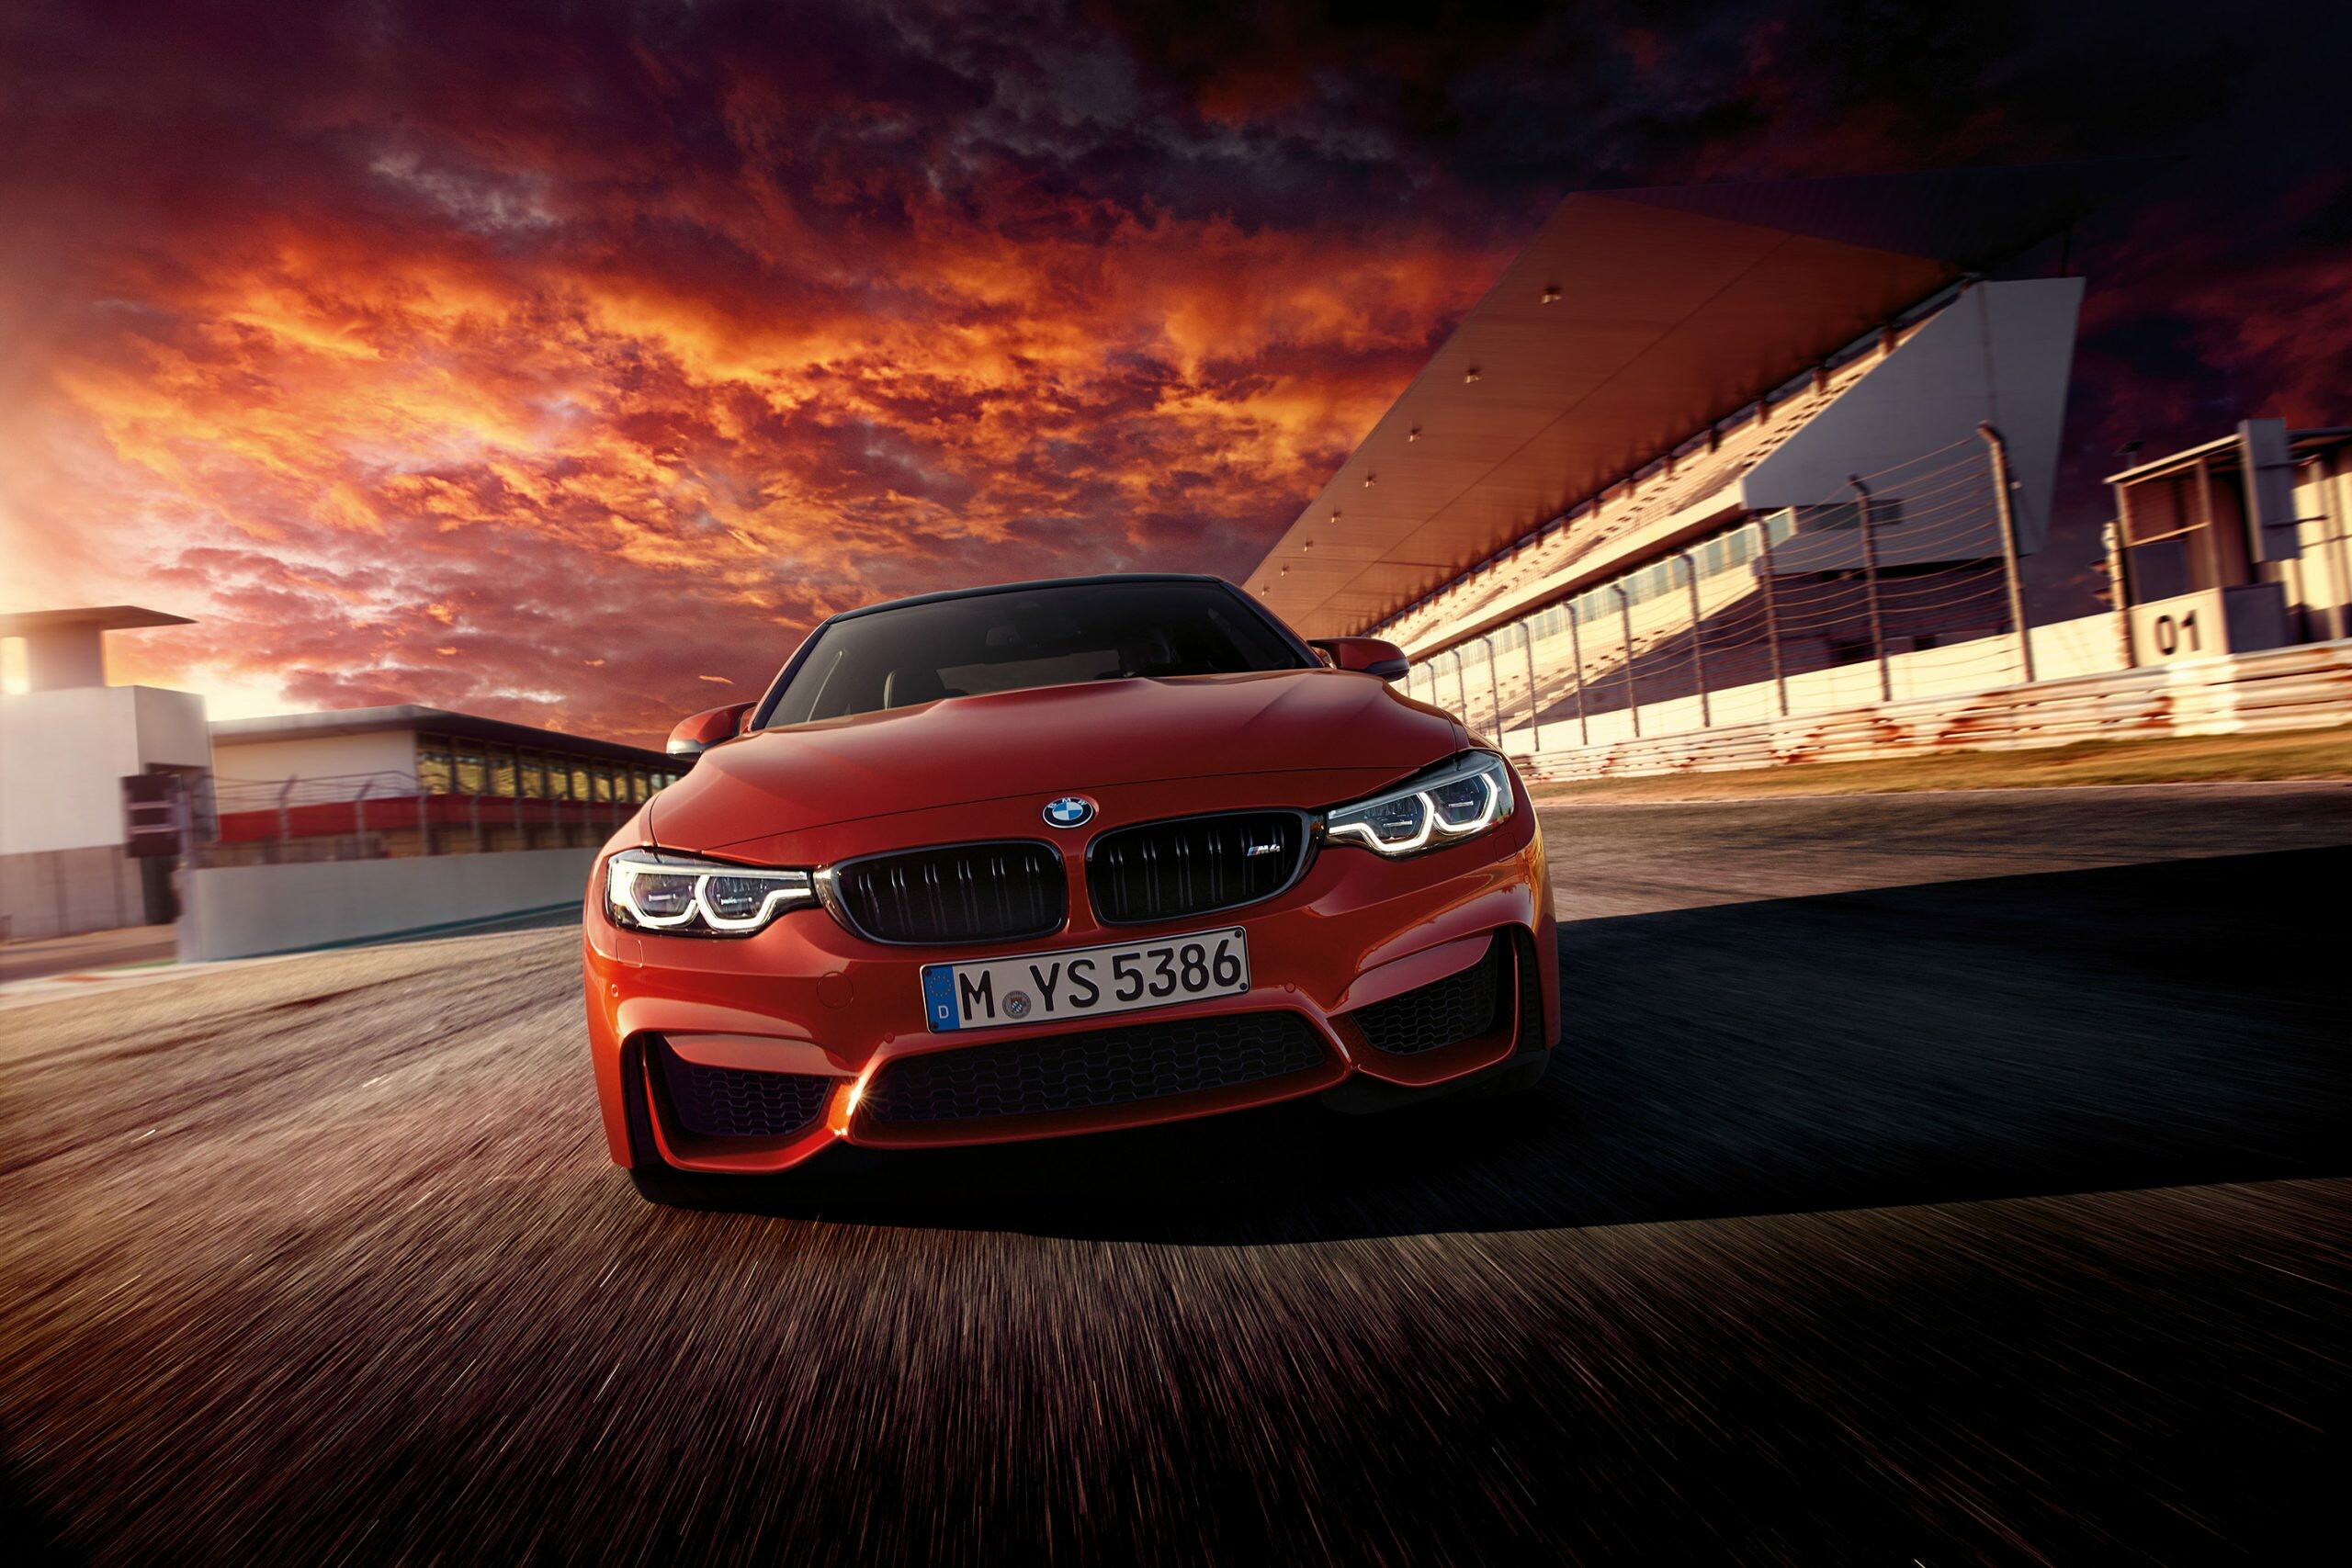 BMW: Automaker, Translated as the Bavarian Engine Works Company, M4. 2560x1710 HD Wallpaper.